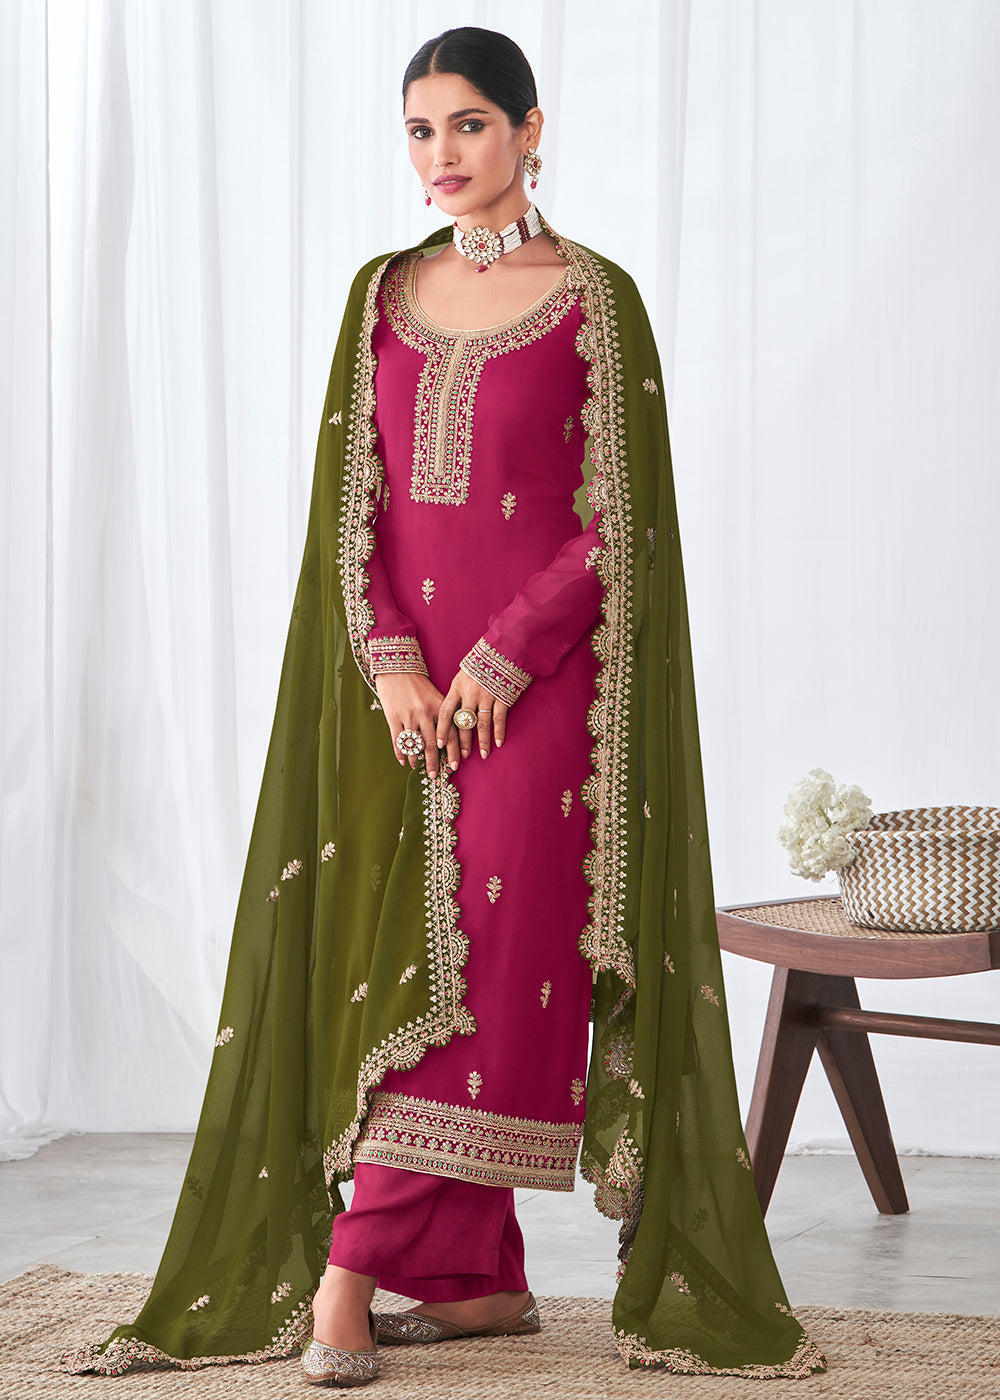 Buy Now Beautiful Magenta Pink Indian Party Wear Salwar Suit Online in USA, UK, Canada, Germany & Worldwide at Empress Clothing.